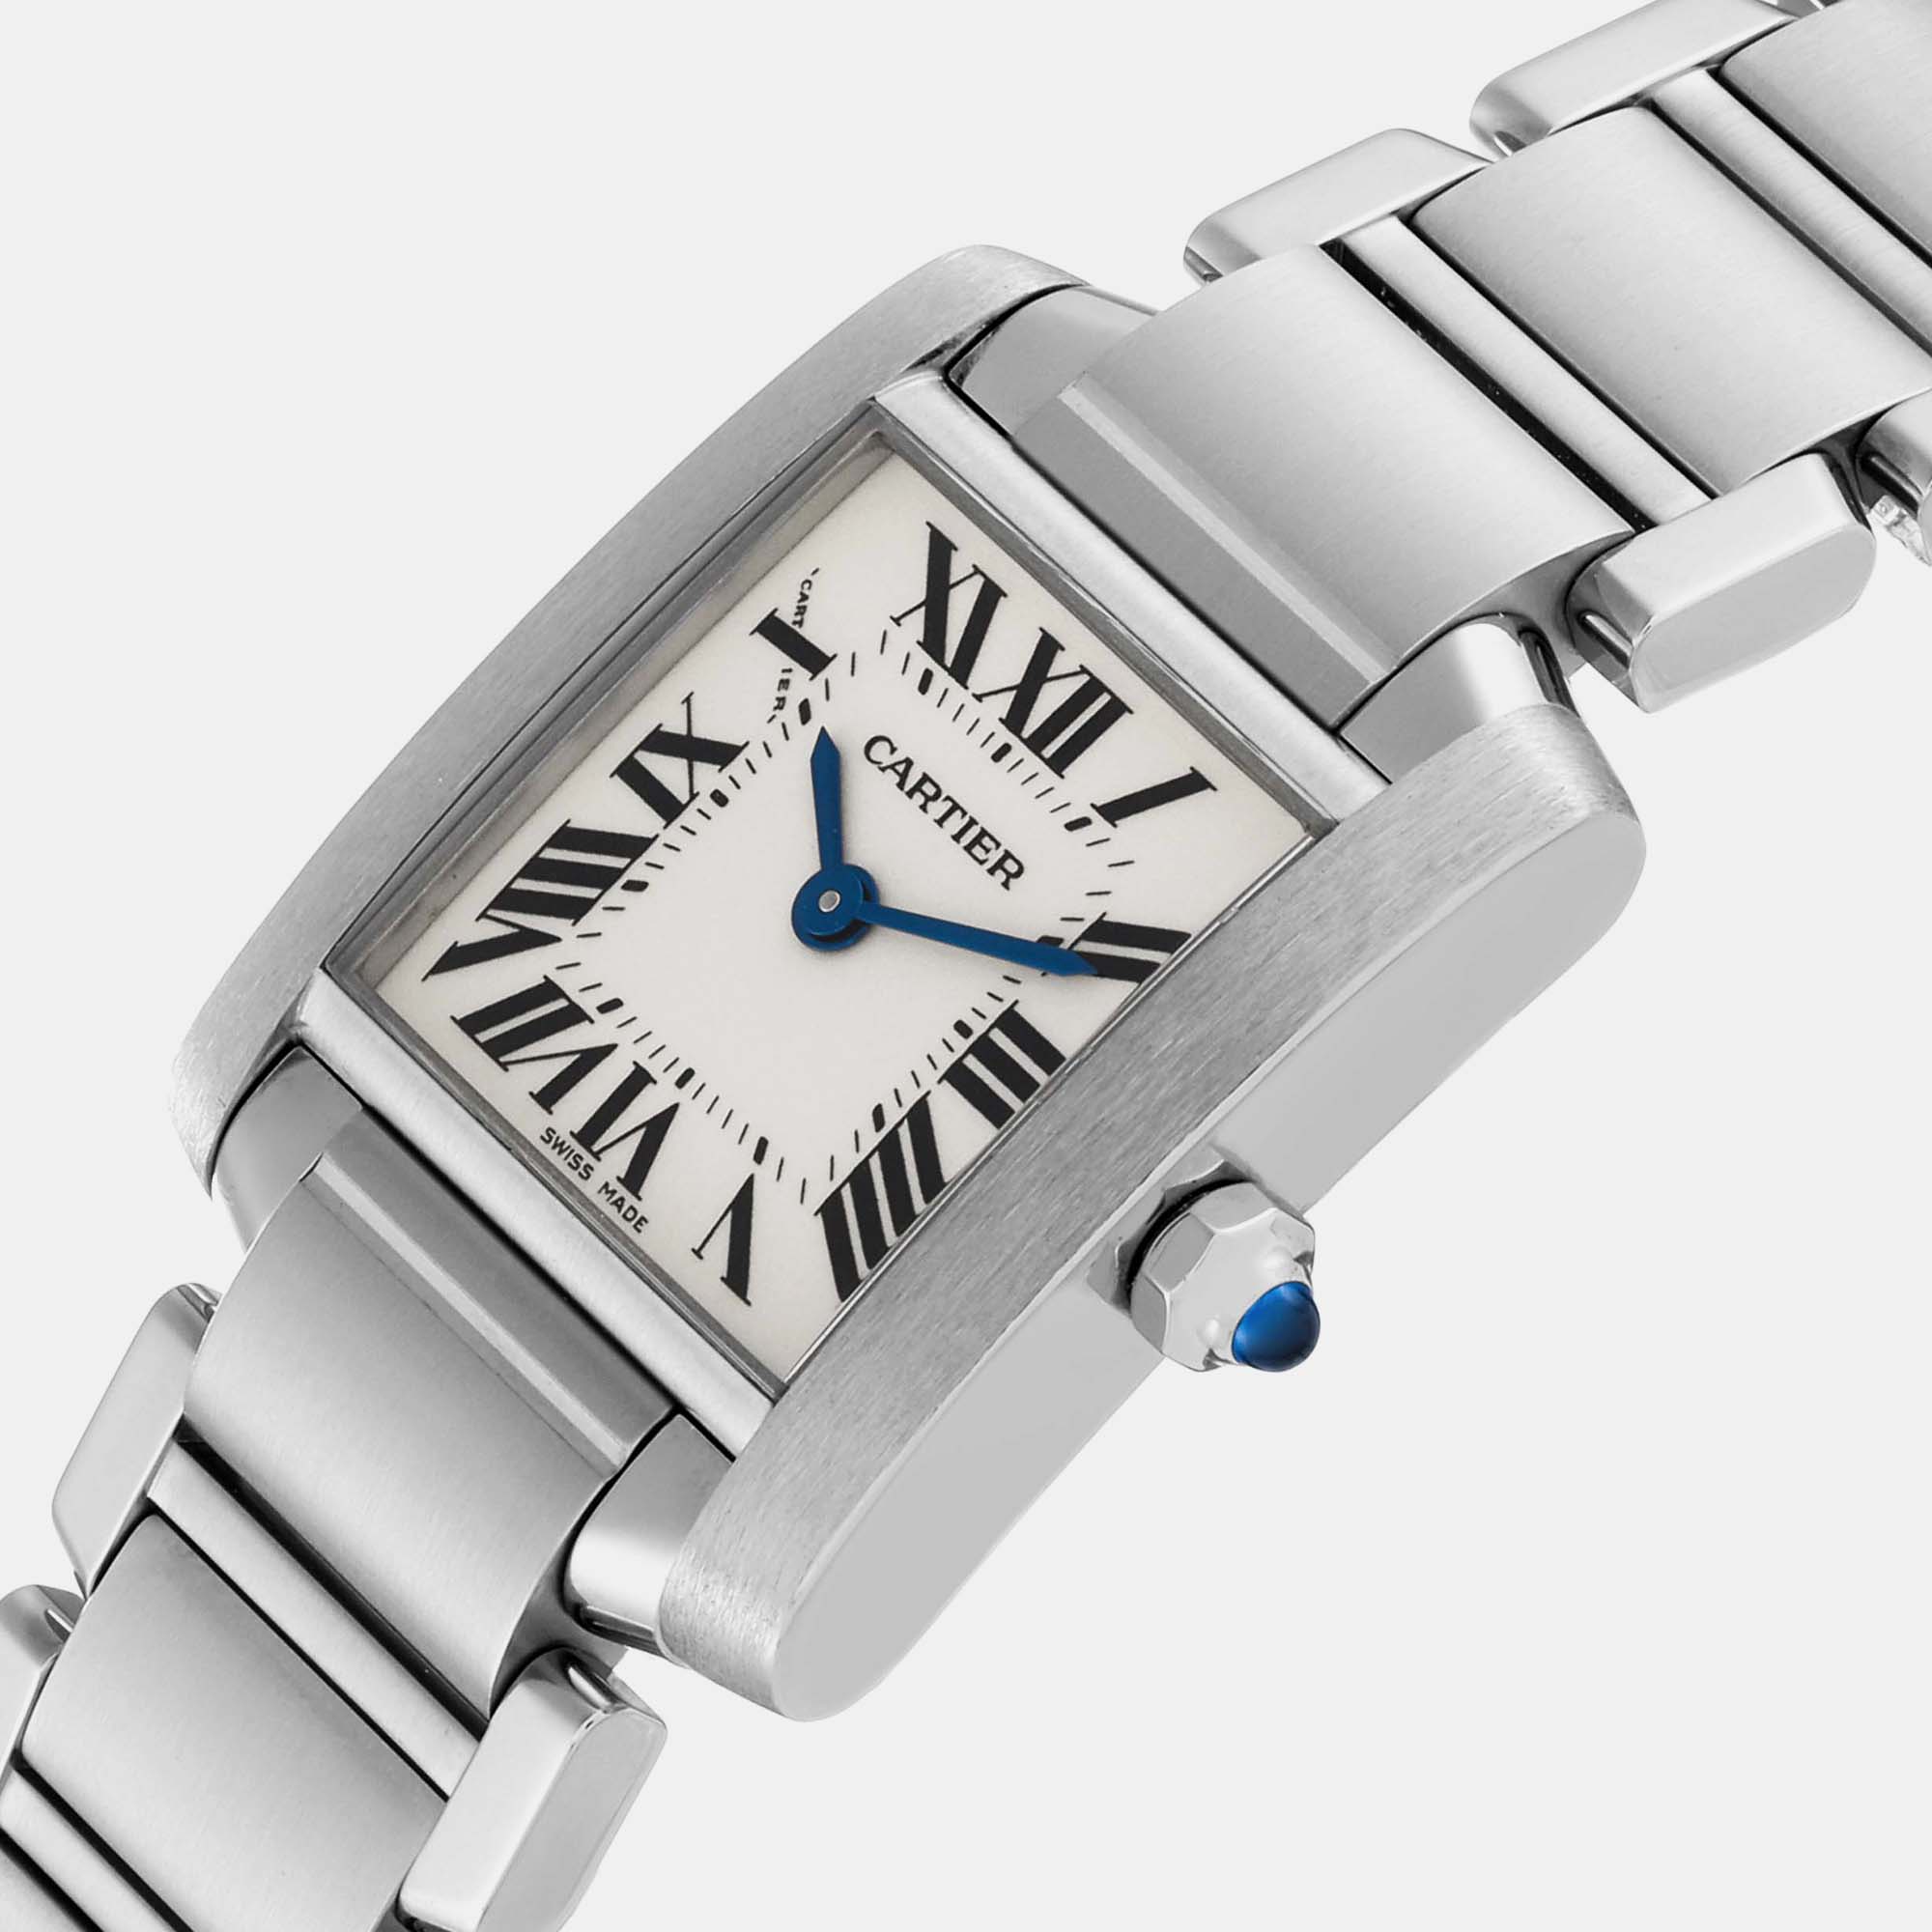 

Cartier Tank Francaise Small Silver Dial Steel Ladies Watch W51008Q3 20.0 mm x 25.0 mm